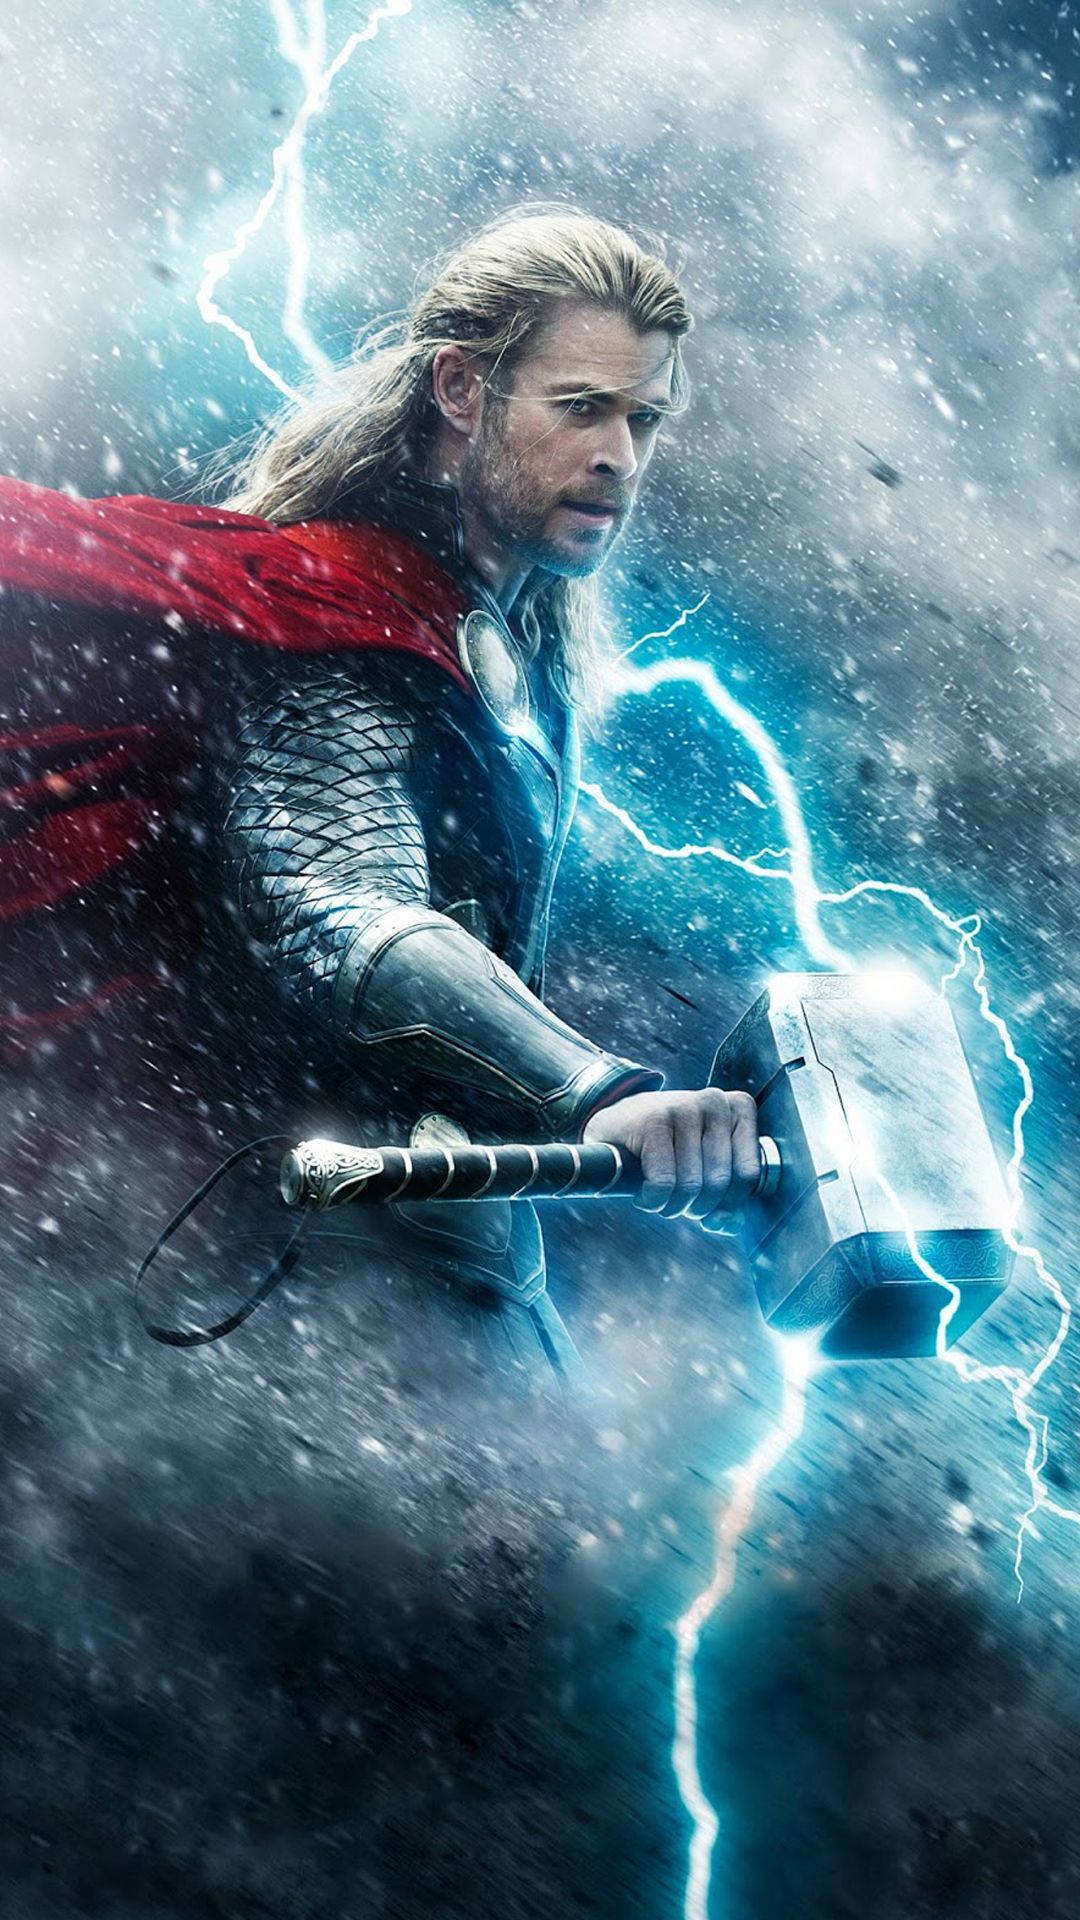 Thor wallpaper for iPhone with resolution 1080X1920 pixel. You can make this wallpaper for your iPhone 5, 6, 7, 8, X backgrounds, Mobile Screensaver, or iPad Lock Screen - Thor